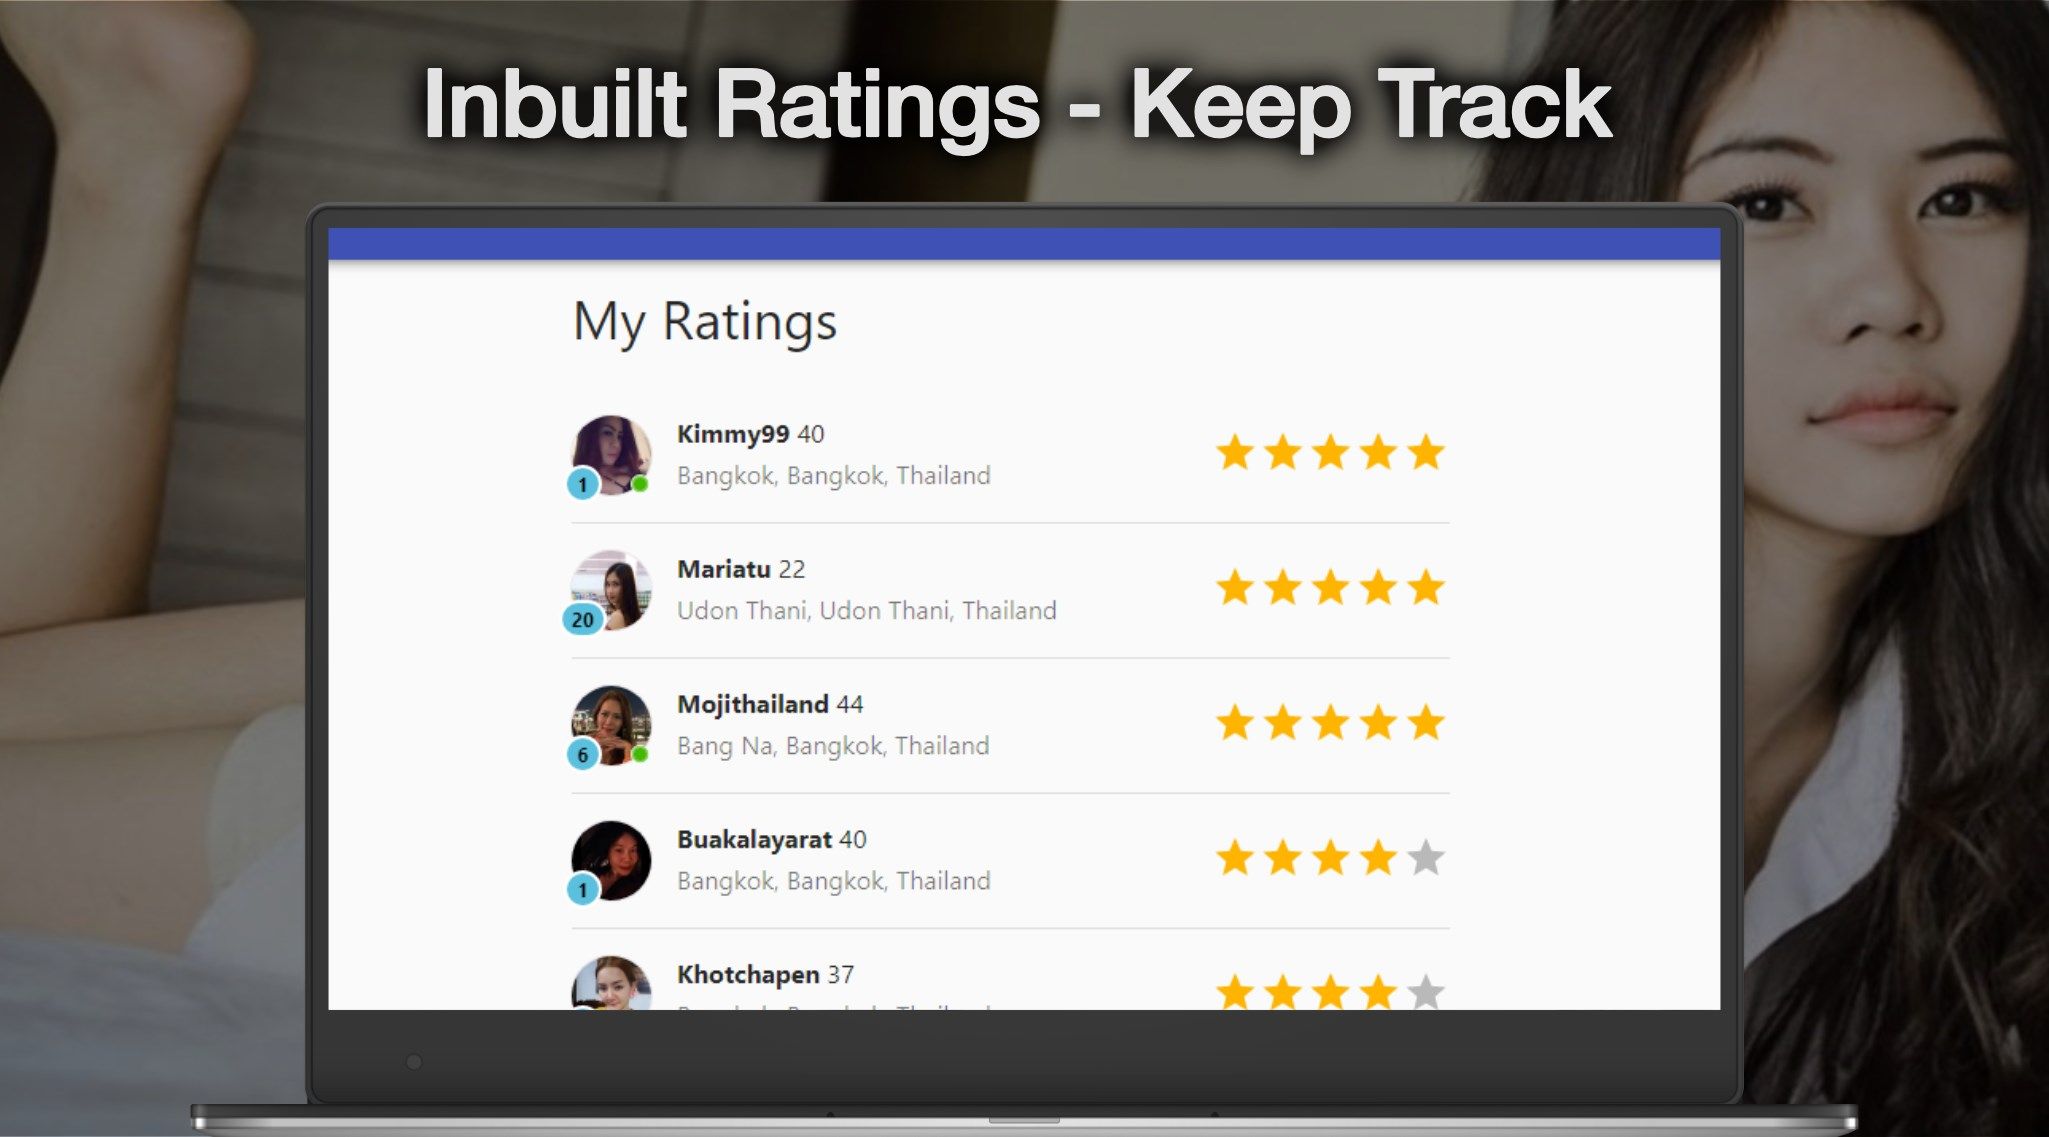 Experience an inbuilt ratings system - Keep track of who you like & how much